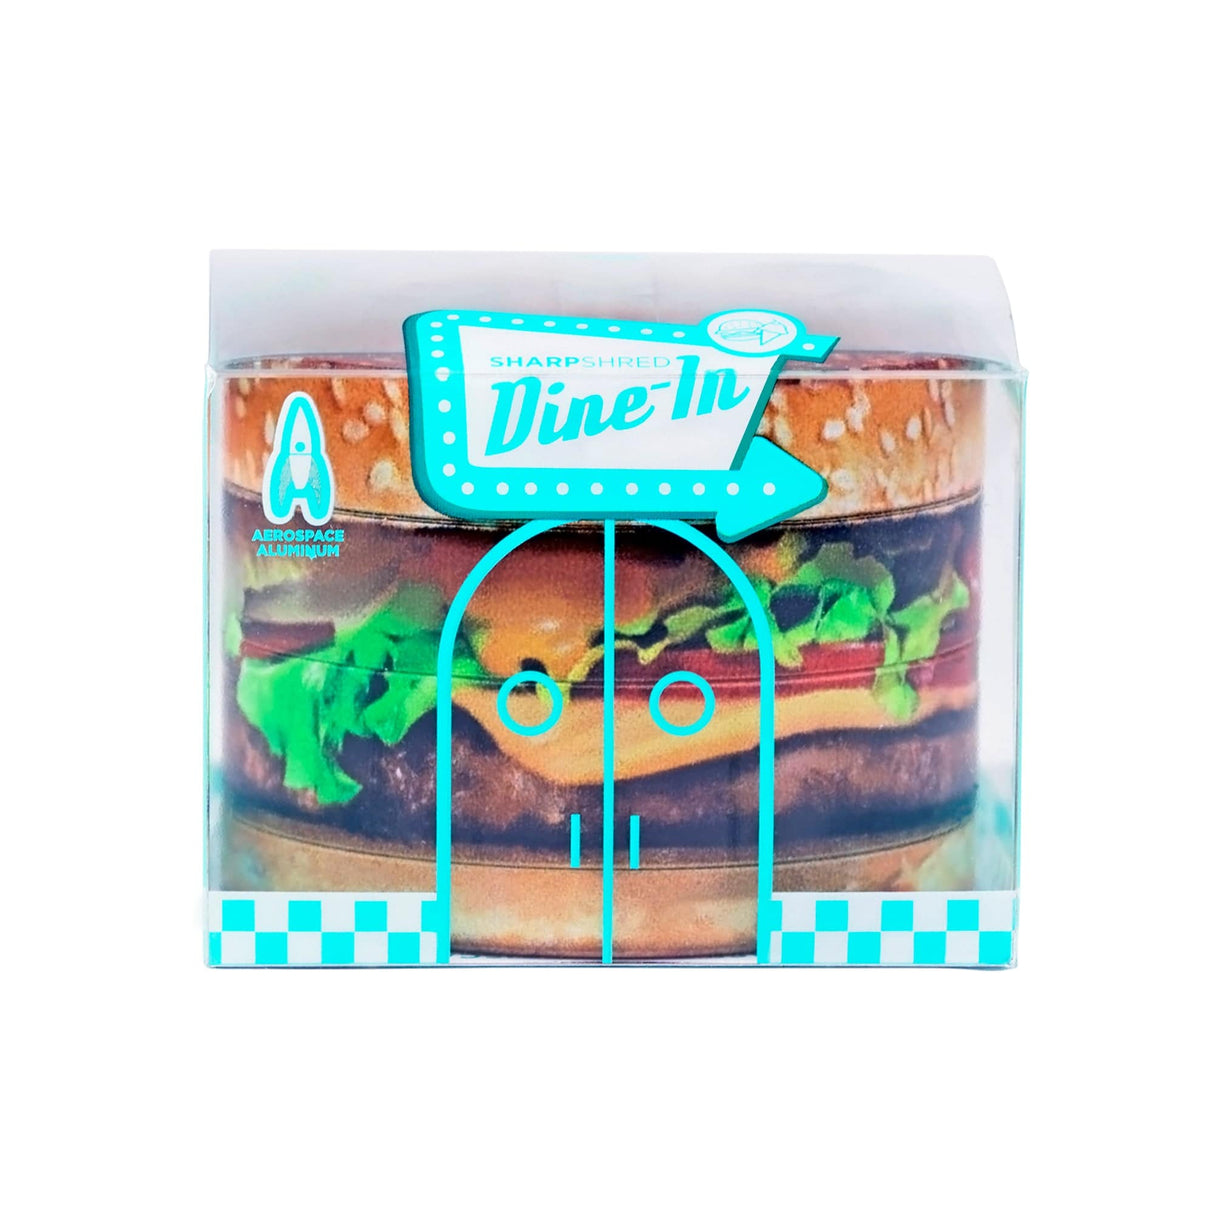 V Syndicate Quarter Pounder 4-Piece Grinder with burger design, front view on white background